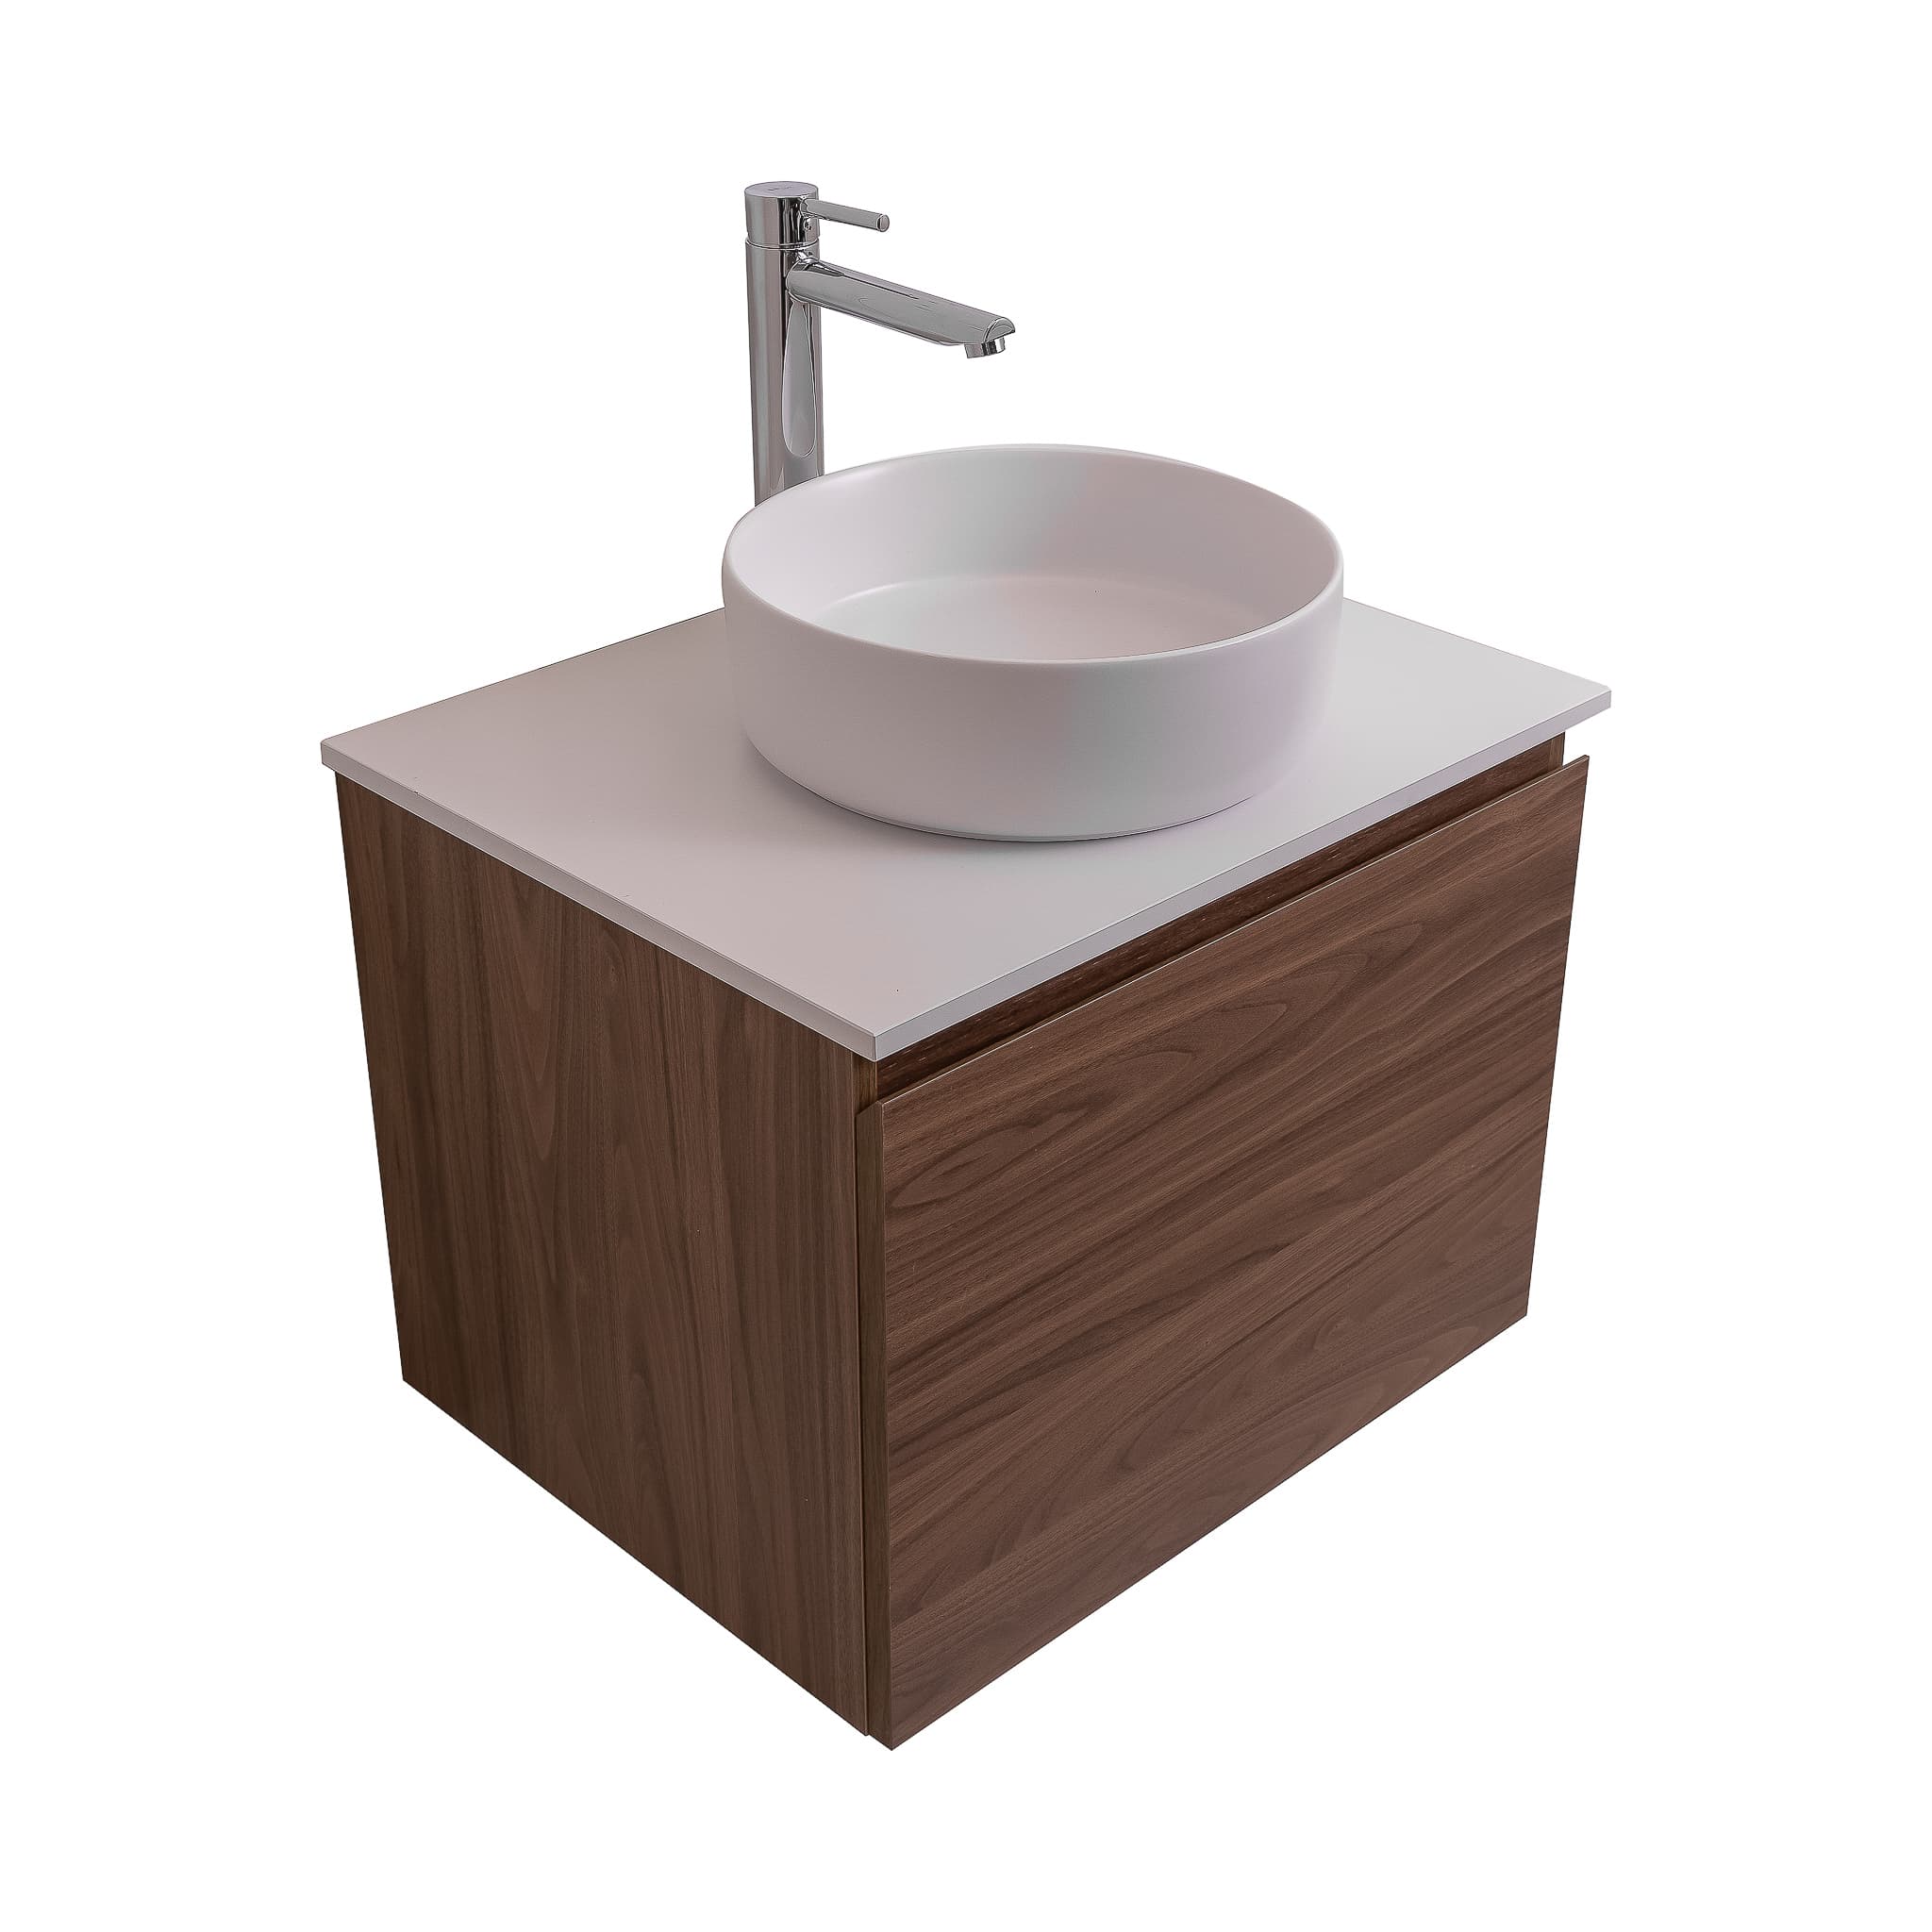 Venice 23.5 Walnut Wood Texture Cabinet, Ares White Top And Ares White Ceramic Basin, Wall Mounted Modern Vanity Set